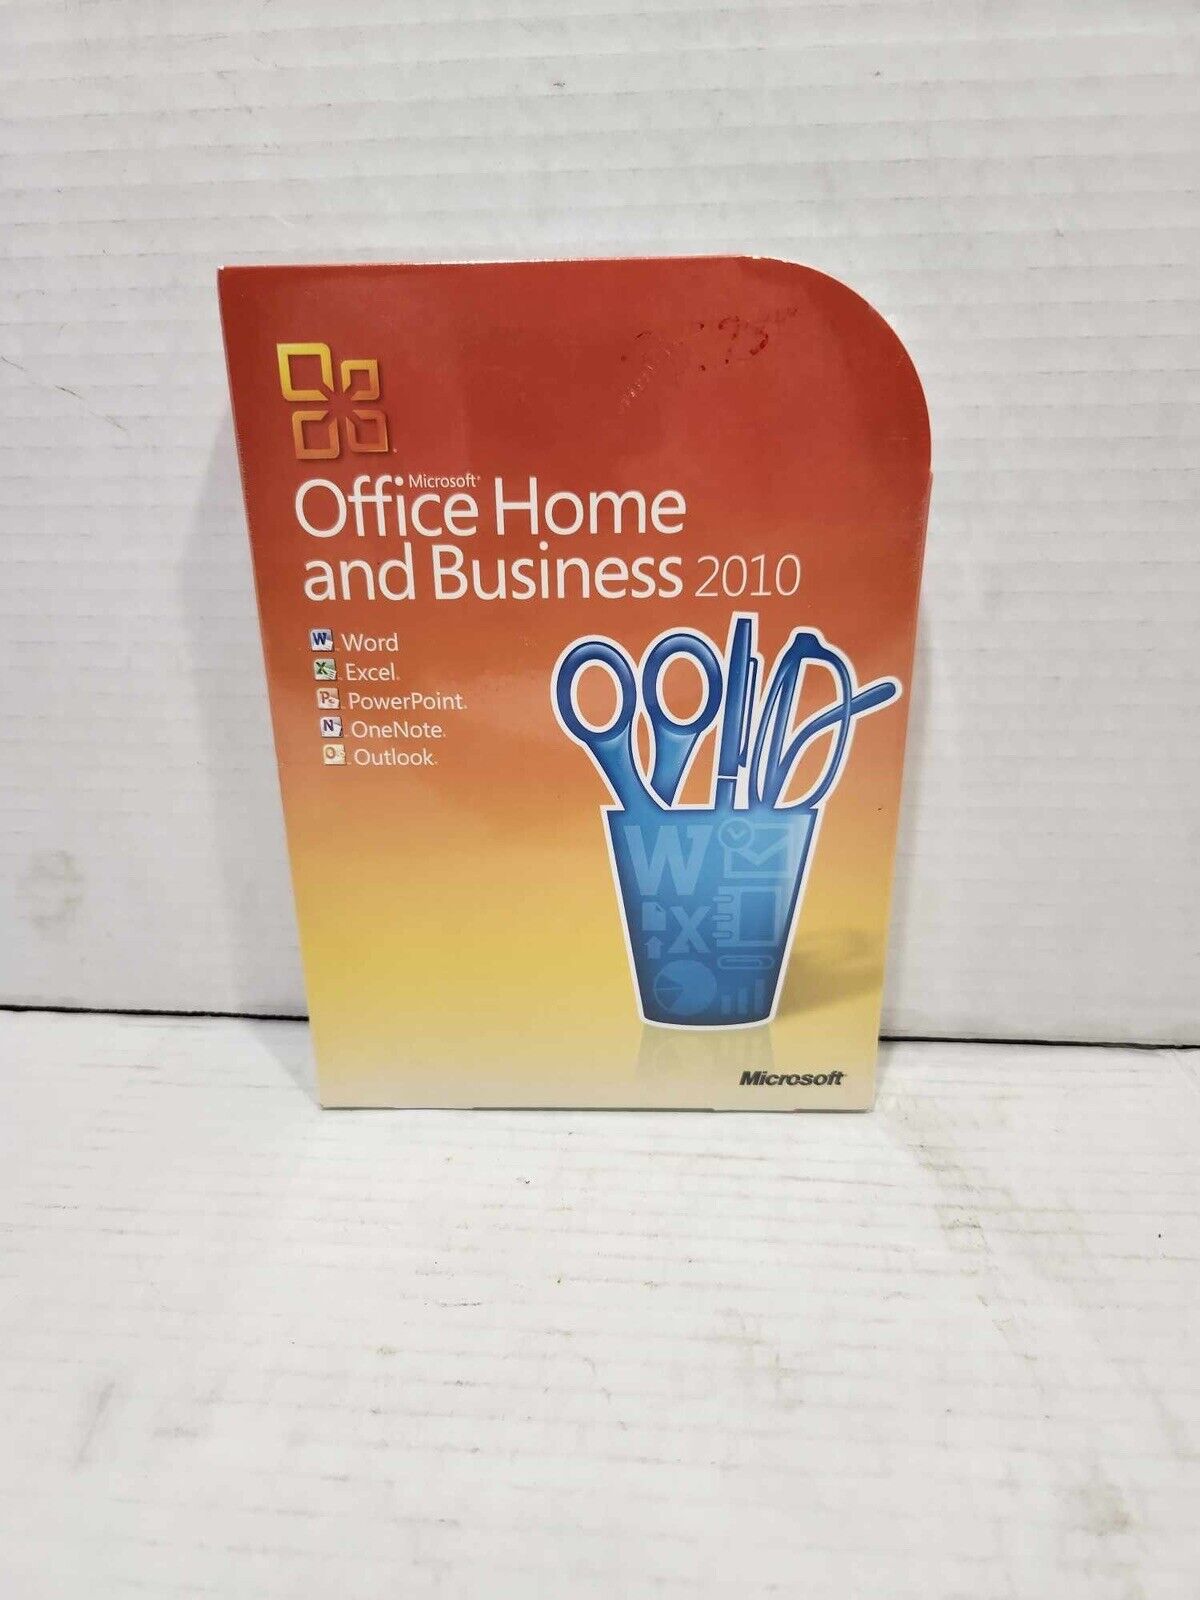 Microsoft Office Home and Business 2010, SKU T5D-00417, Retail Box, Full Version